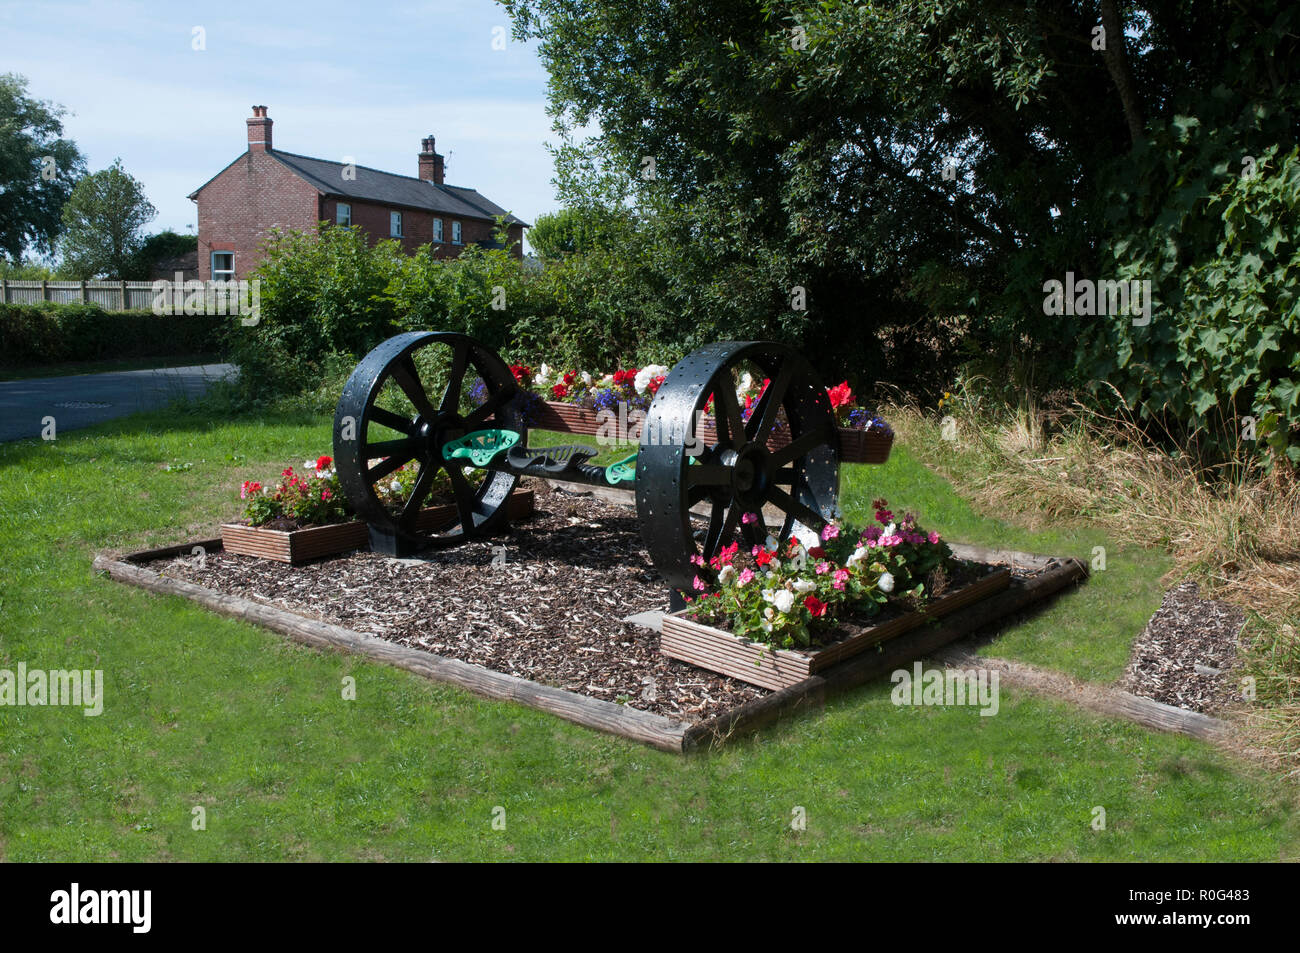 Roadside Flower display of Begonias and Geraniums with an agricultural implement as a center piece.Stalmine village BlackpooL Lancashire England UK Stock Photo